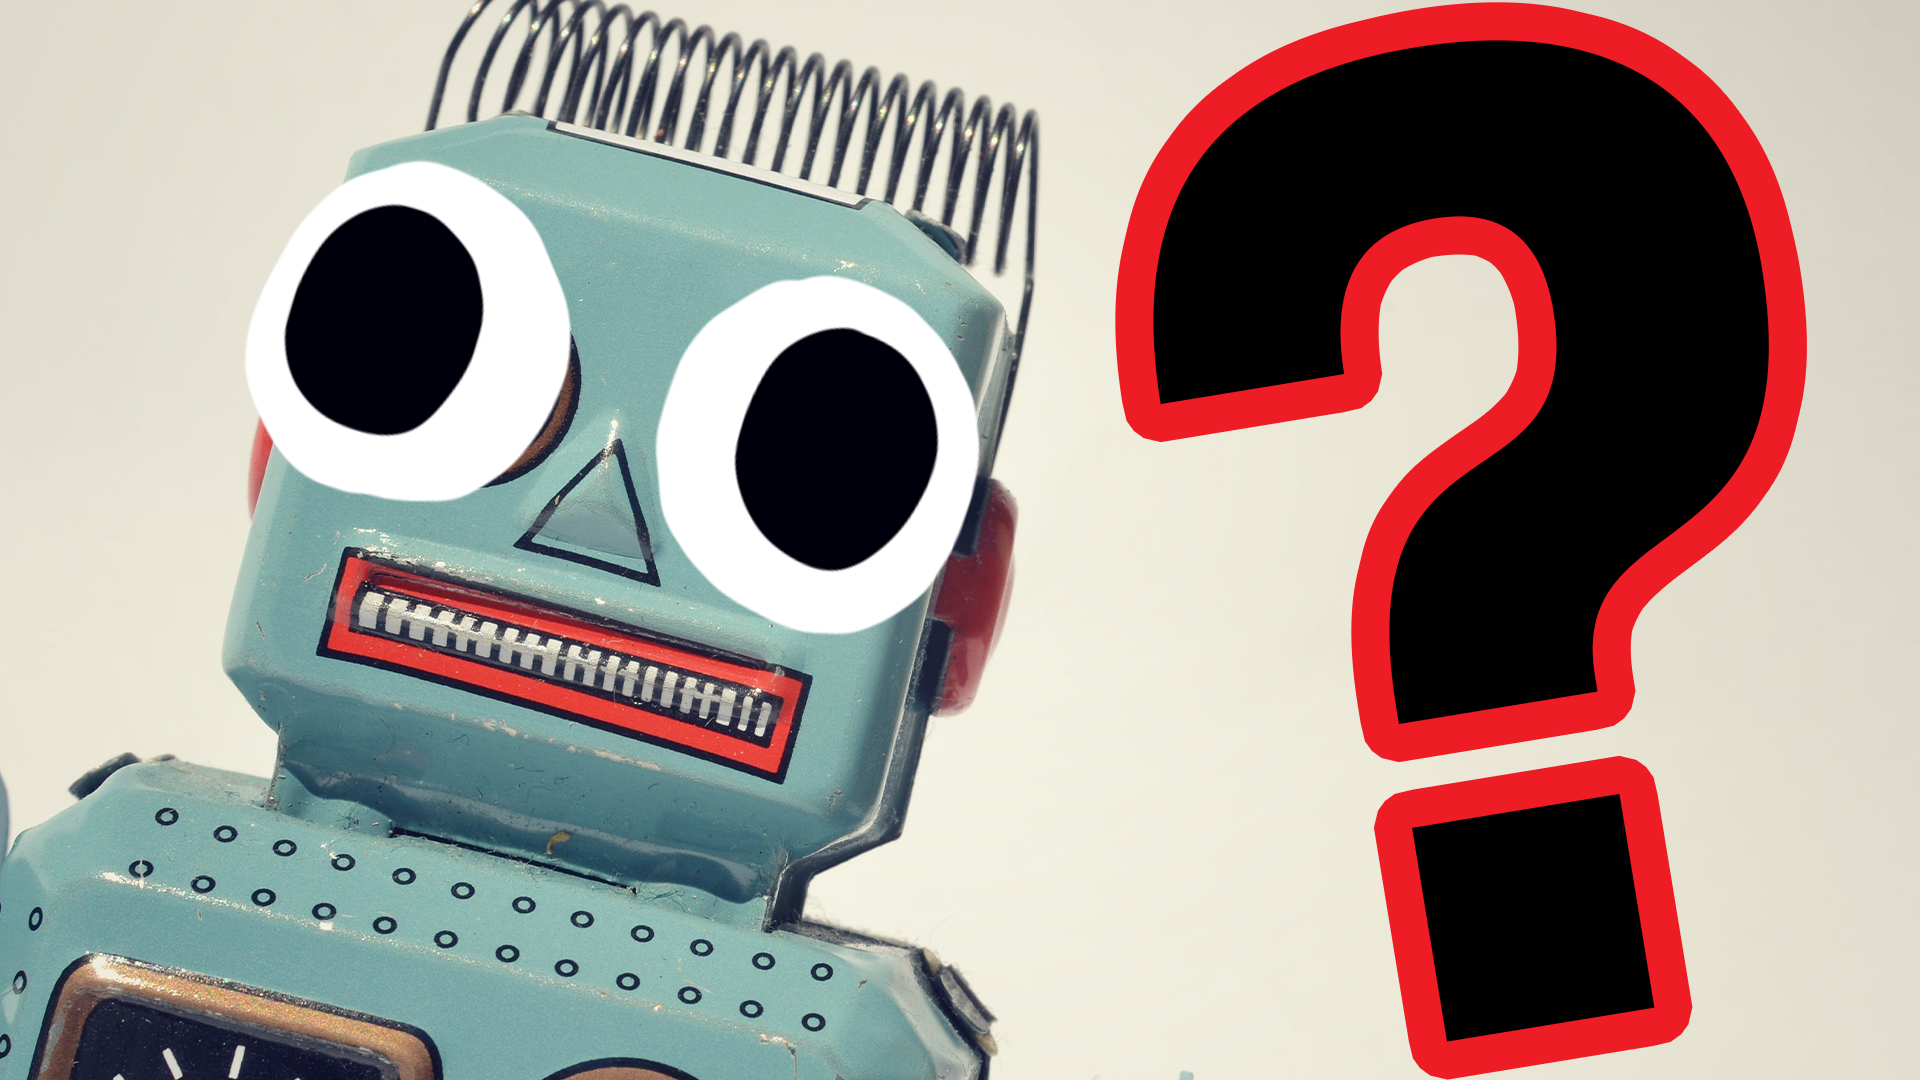 Confused looking robot with question mark